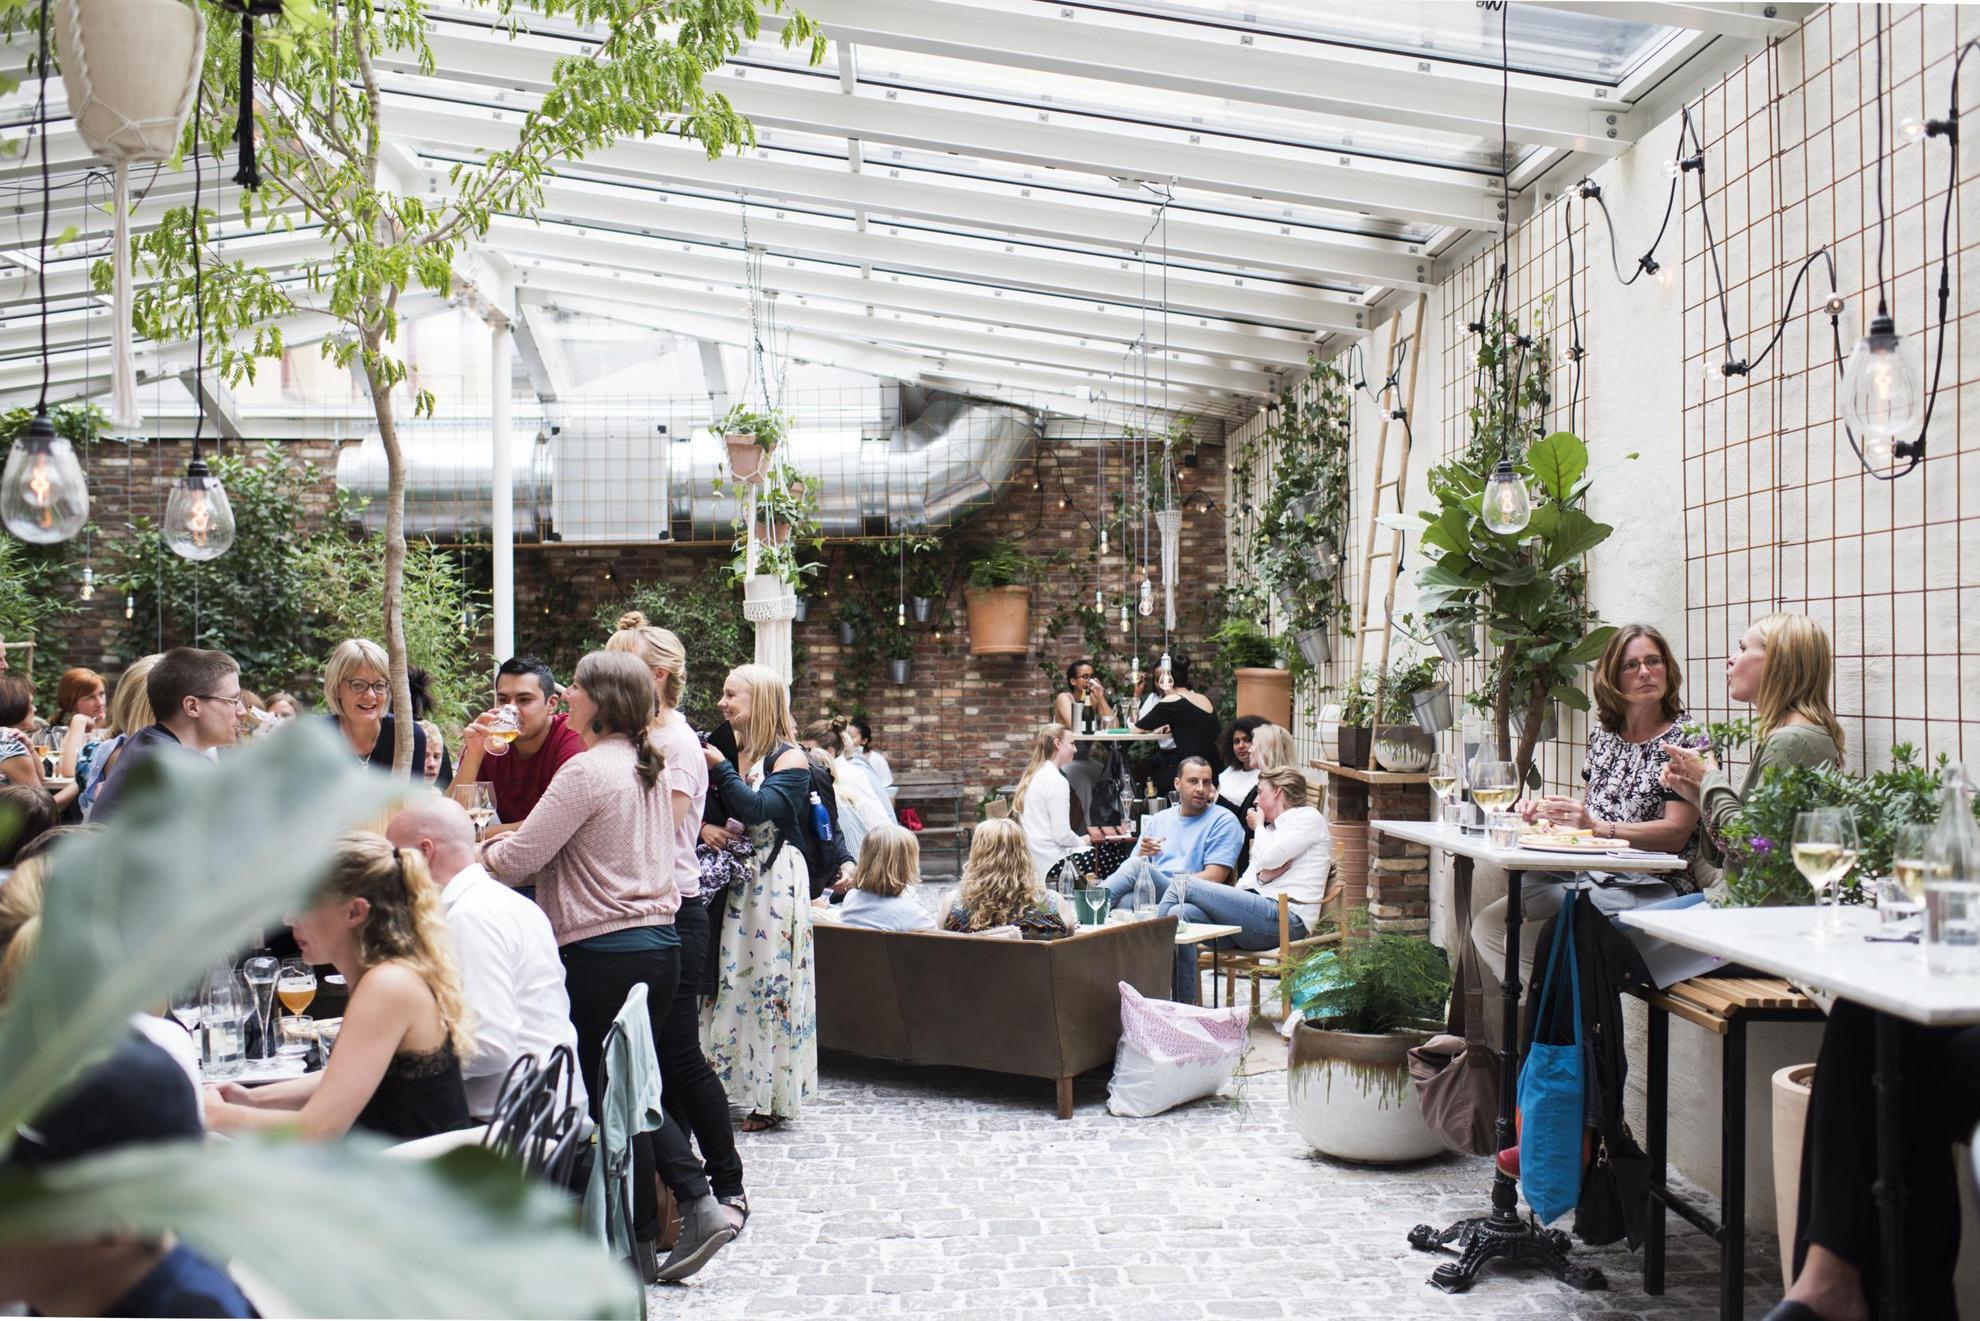 People enjoy drinks and food at a crowded Cafe Magasinet in Gothenburg. The interior is stone floor, brick walls, a glass ceiling and the space is full of green plants.